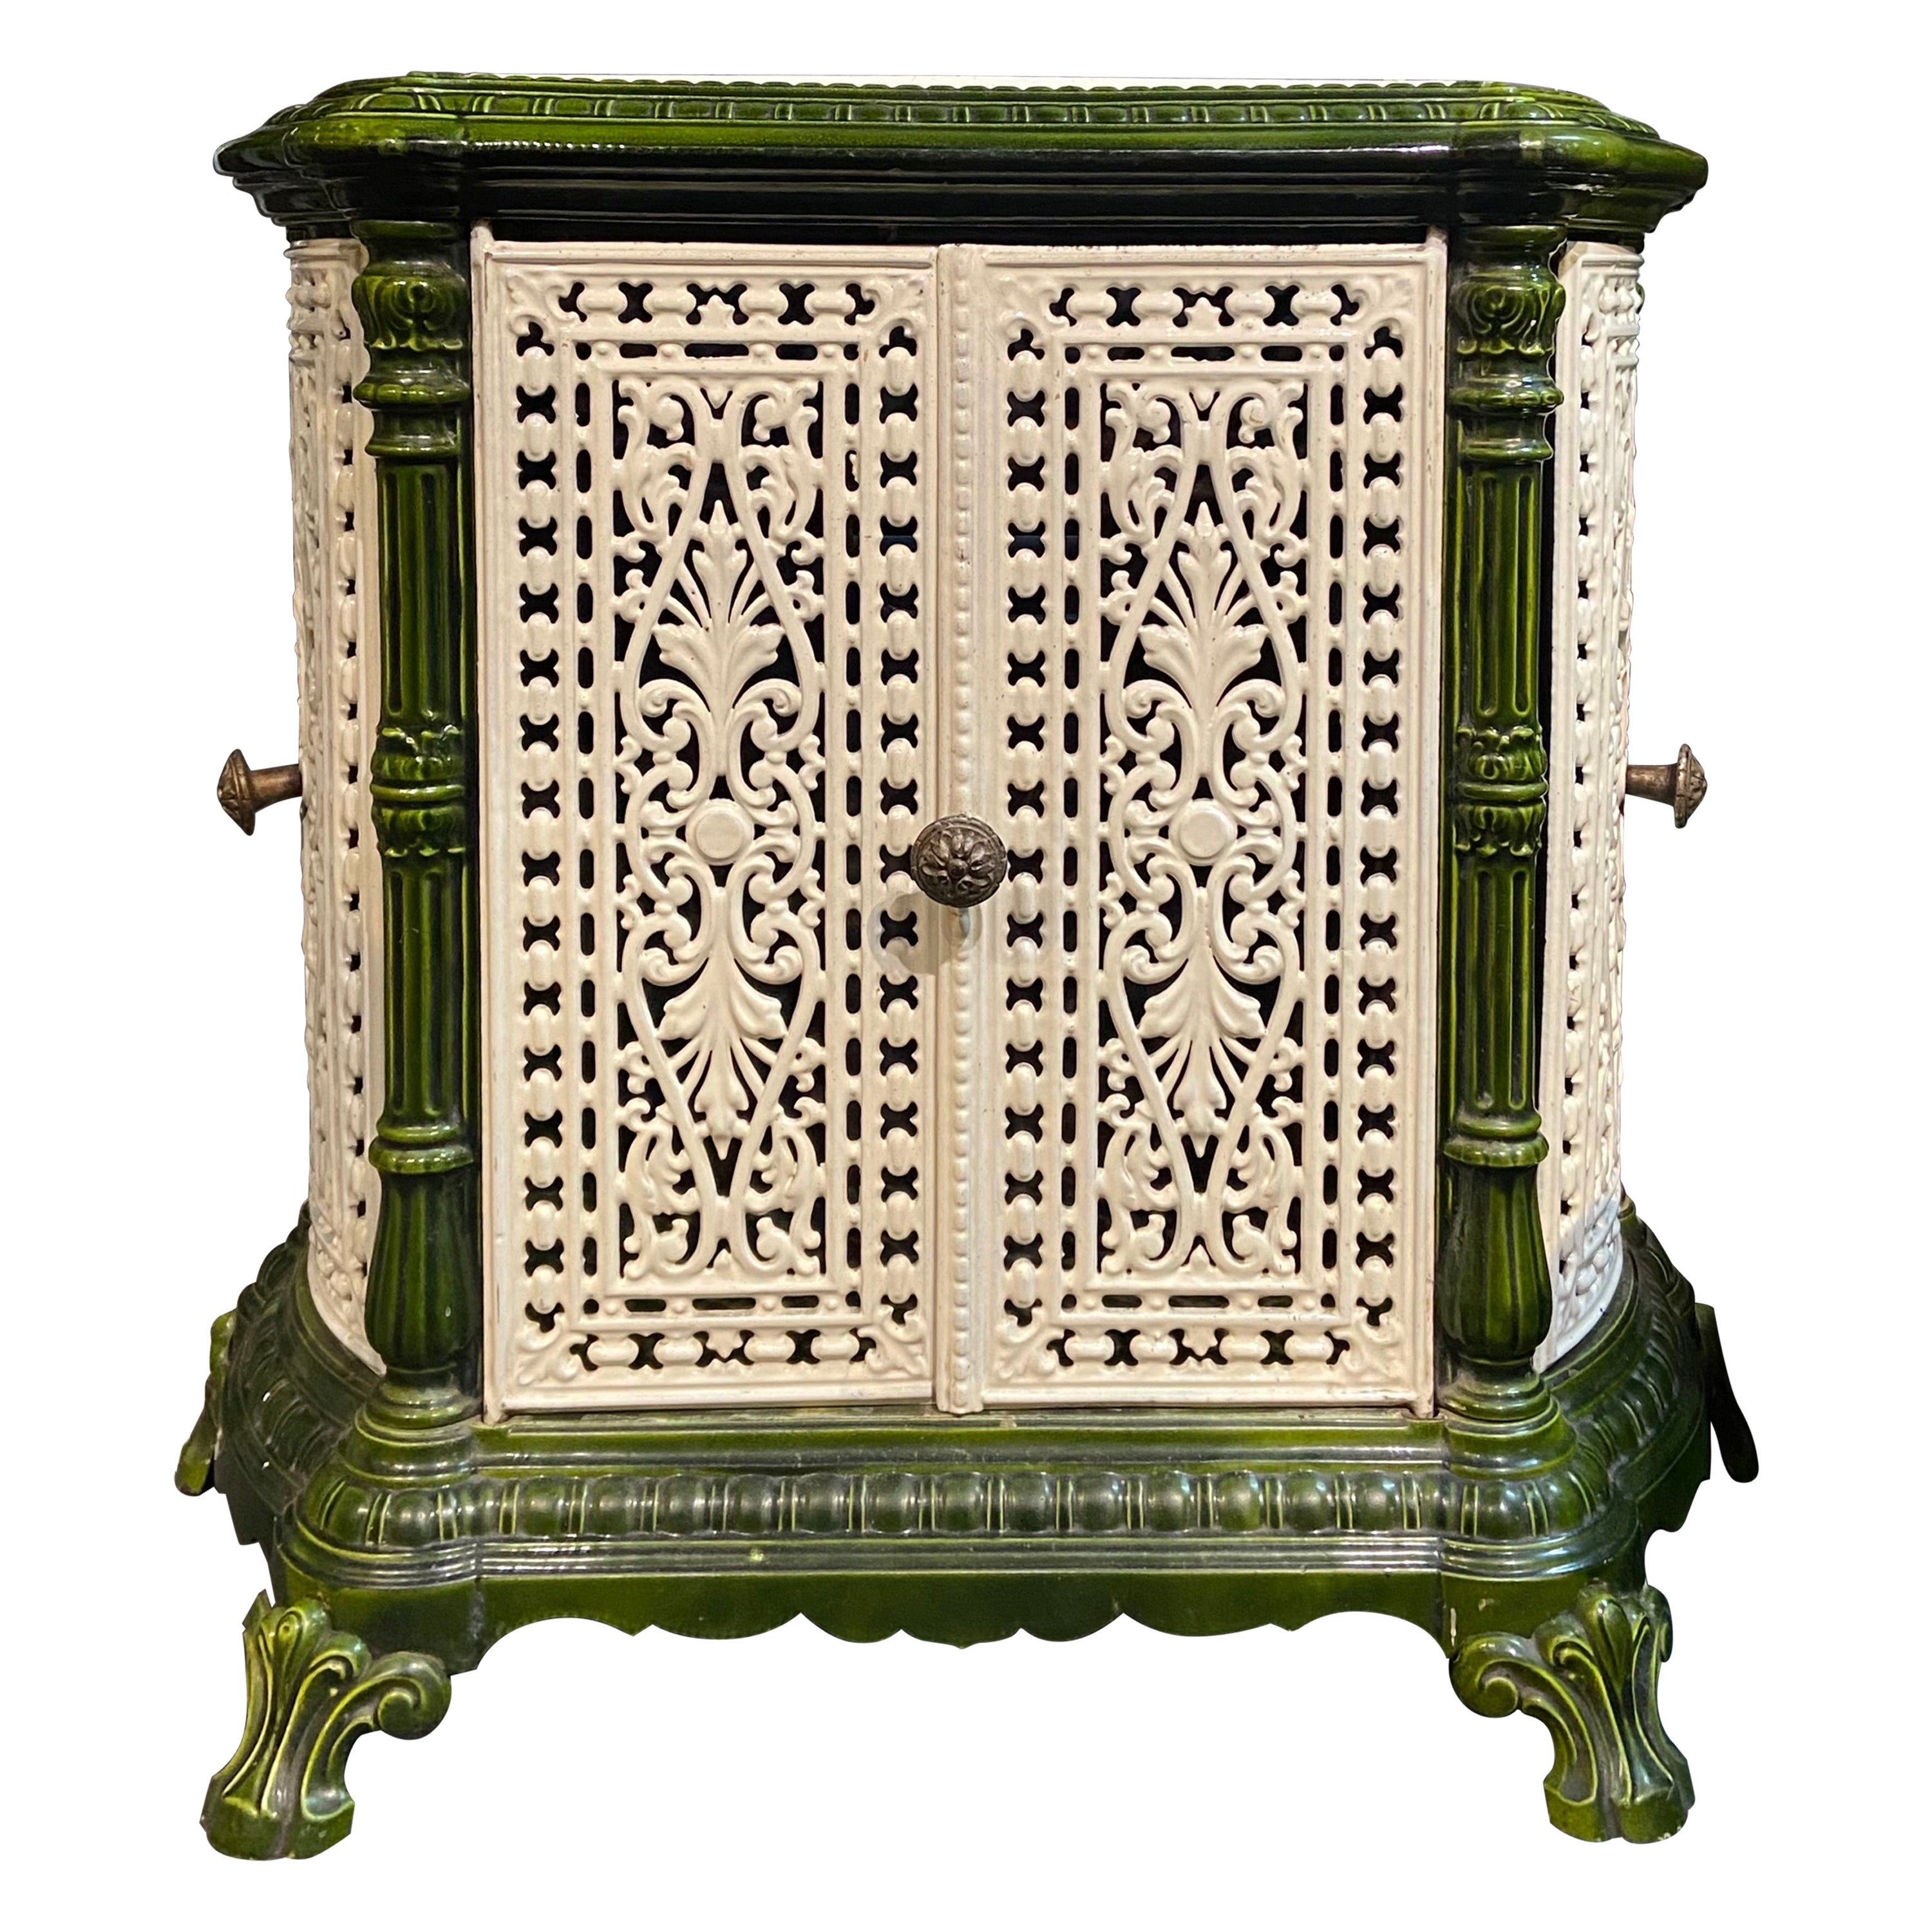 20th Century French Victorian Enameled Cast Iron Footed Radiator Cover For Sale